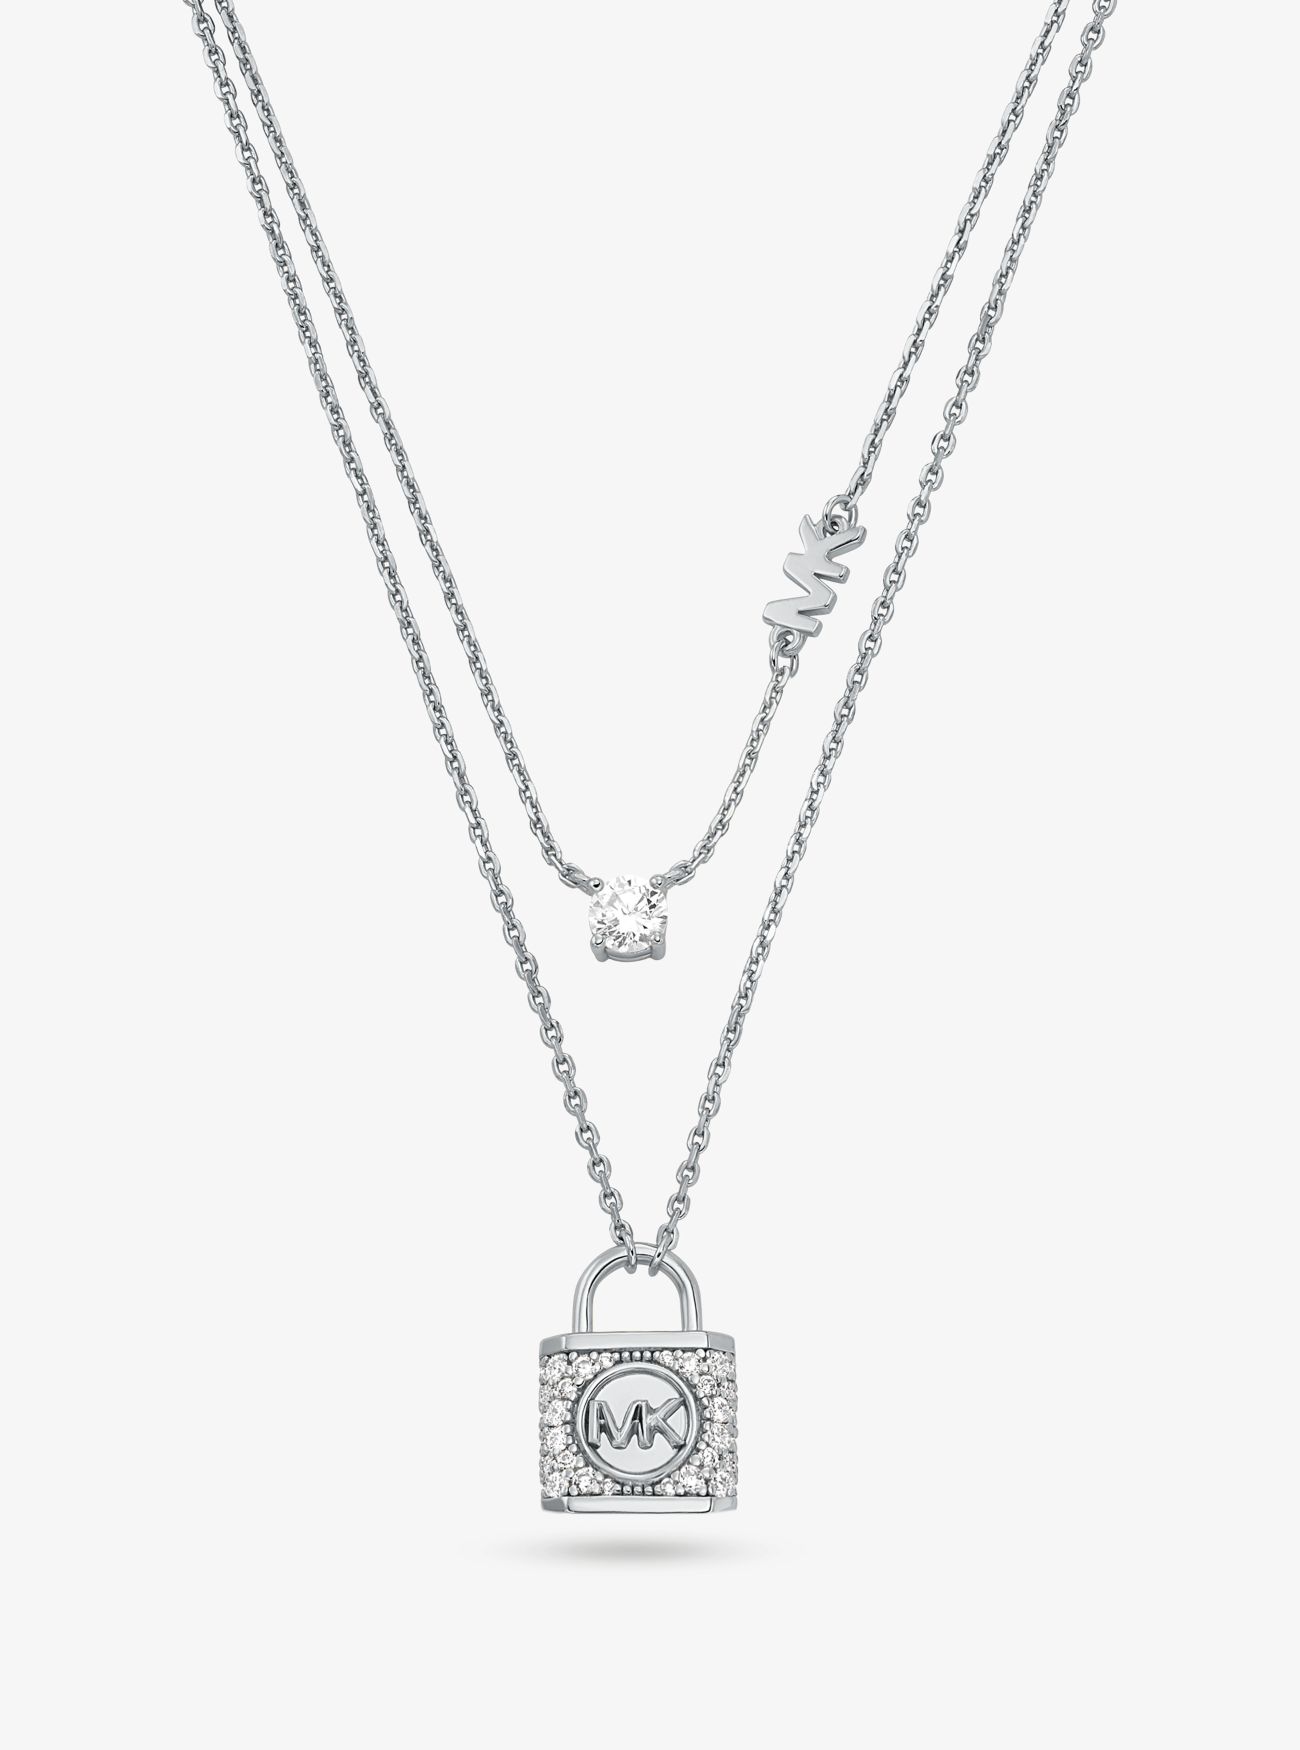 MK Precious Metal-Plated Sterling Silver PavÃ© Lock Layered Necklace - Silver - Michael Kors